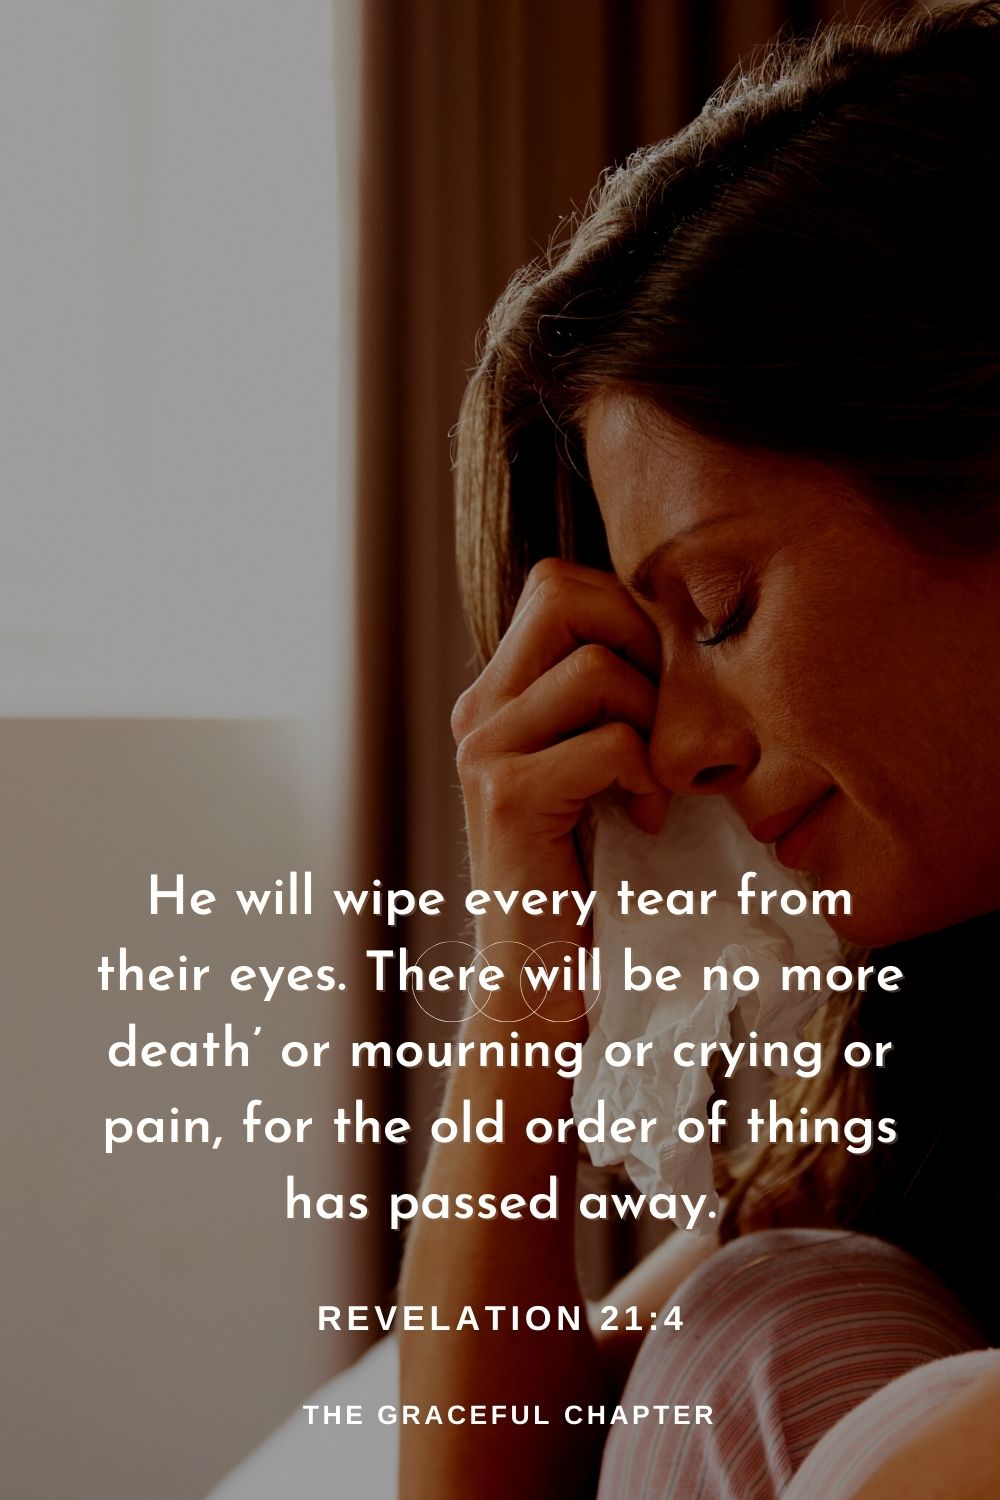 He will wipe every tear from their eyes. There will be no more death’ or mourning or crying or pain, for the old order of things has passed away.